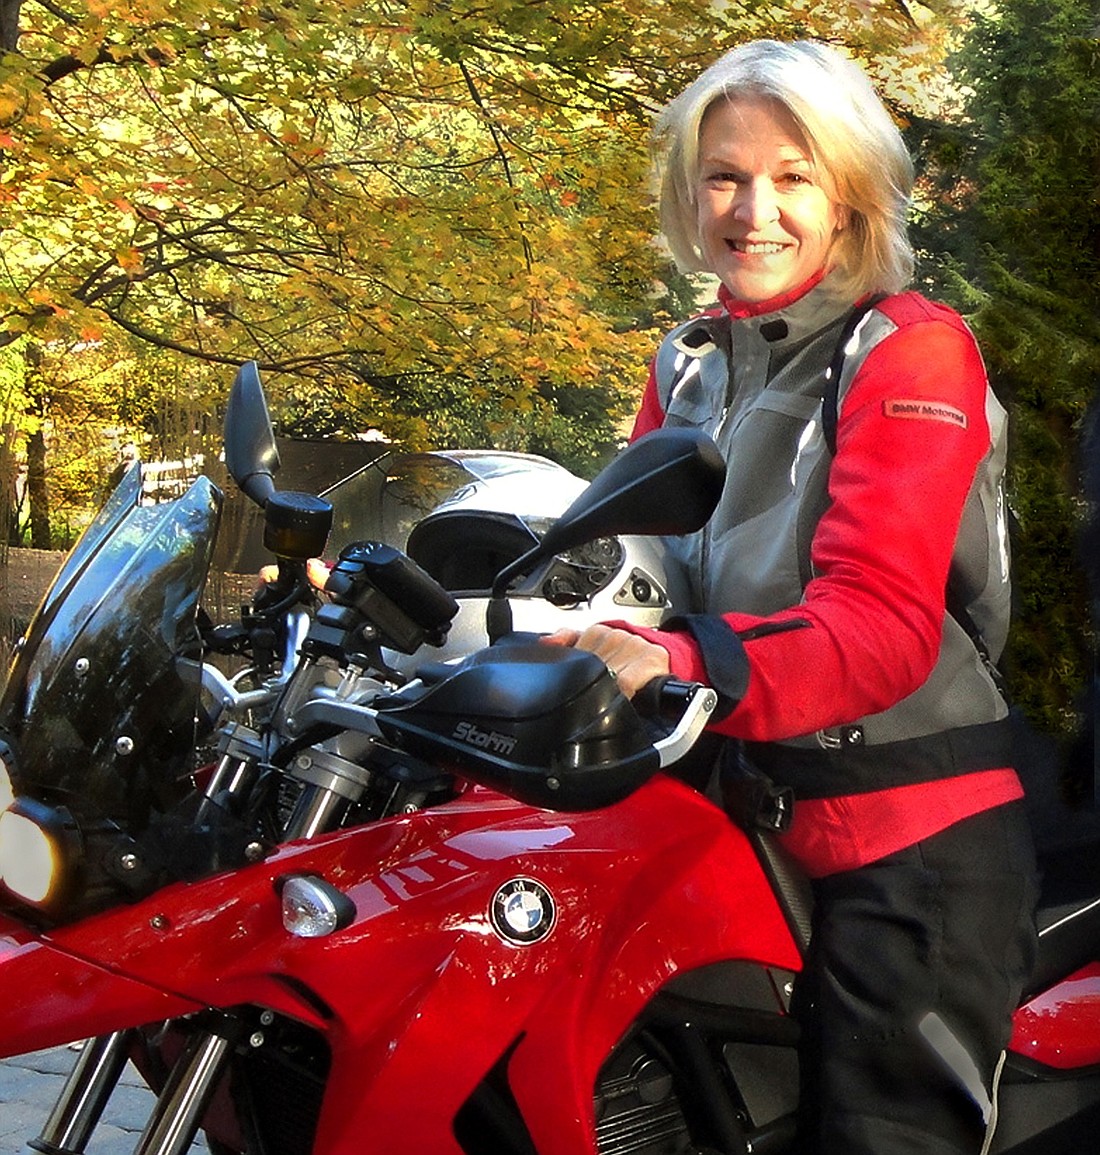 A year after losing her husband to cancer, the author found an unusual route to finding joy again in her life – she signed up for a 2,500- mile motorcycle road trip down America’s Pacific Northwest Coast riding a Harley. “The problem was that I didn’t know how to ride and had only thirty days to learn.”